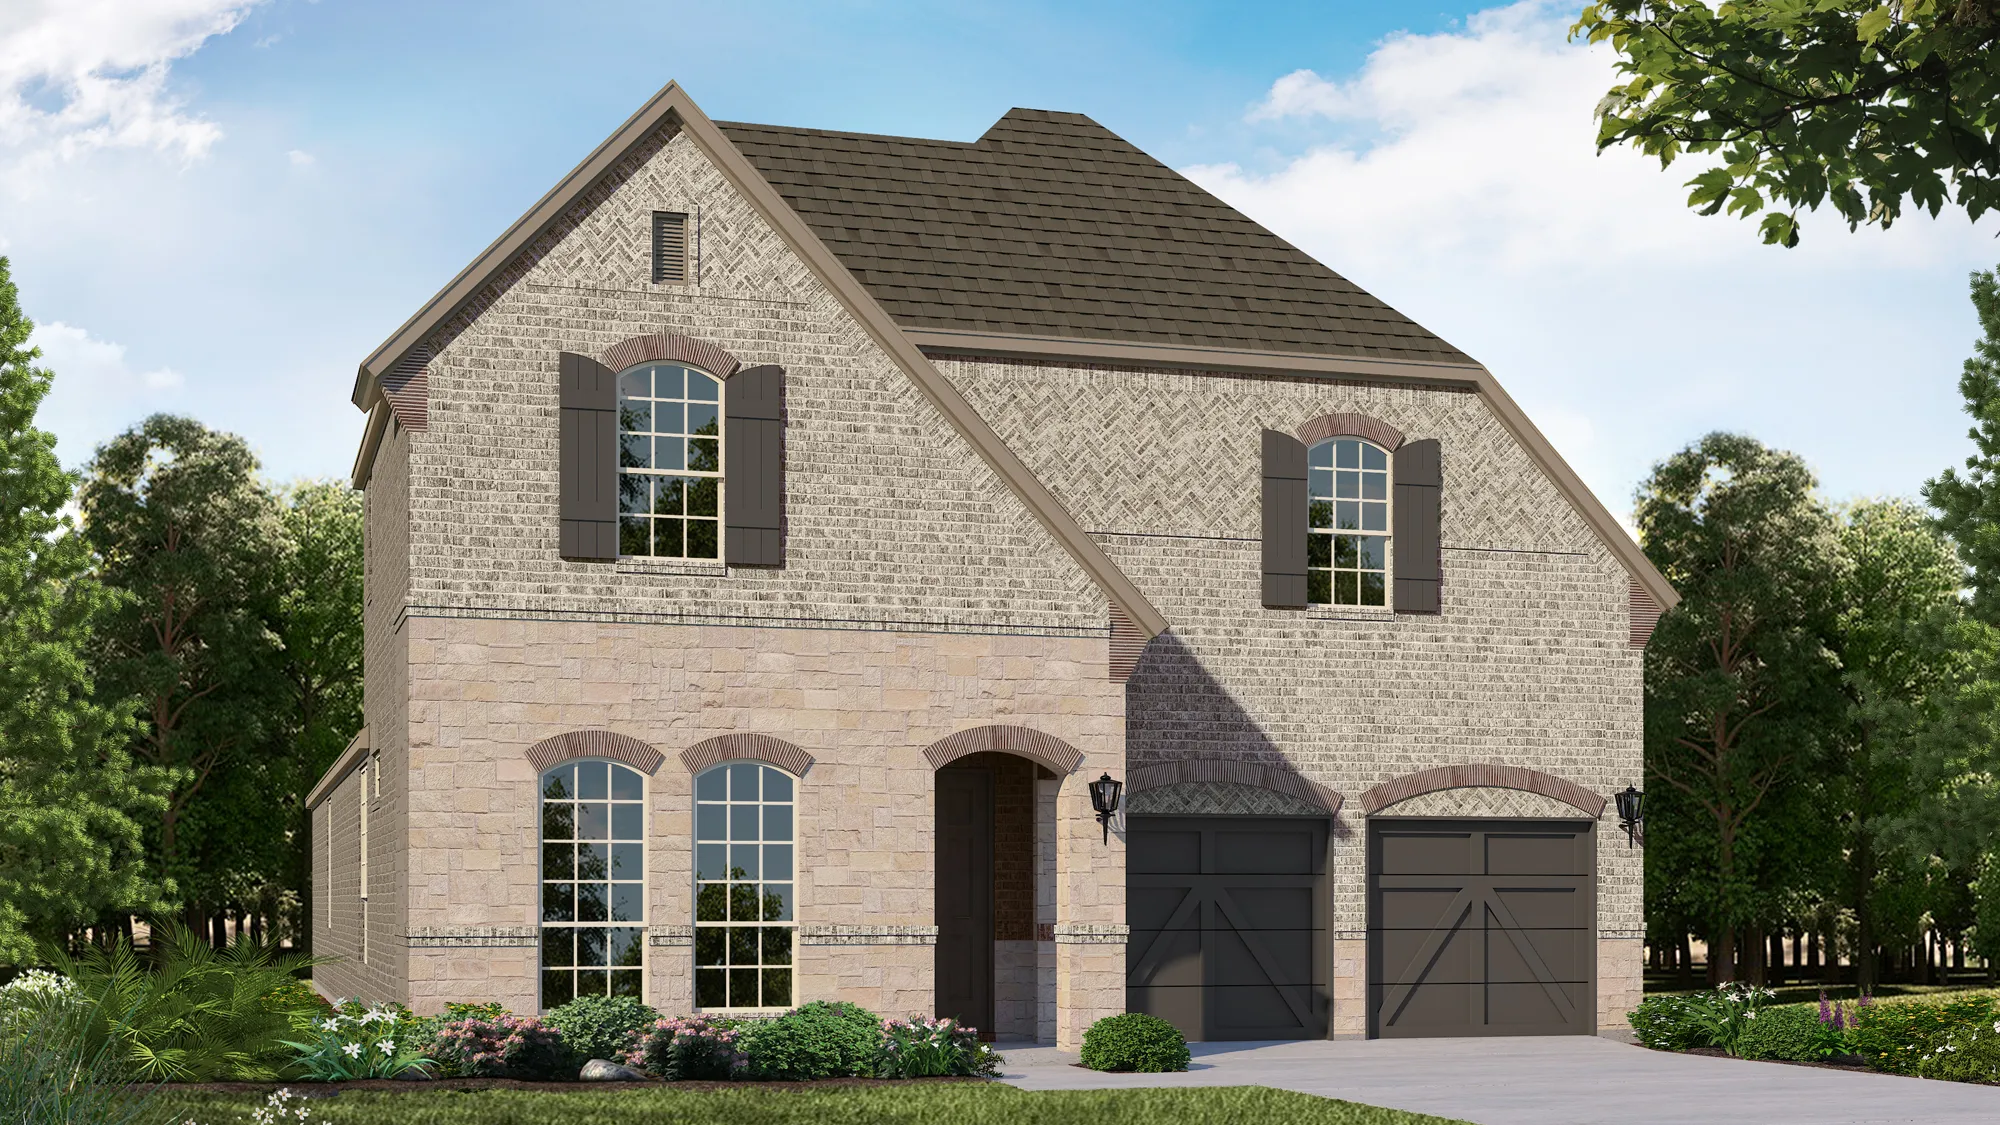 Plan 1167 Elevation D with Stone